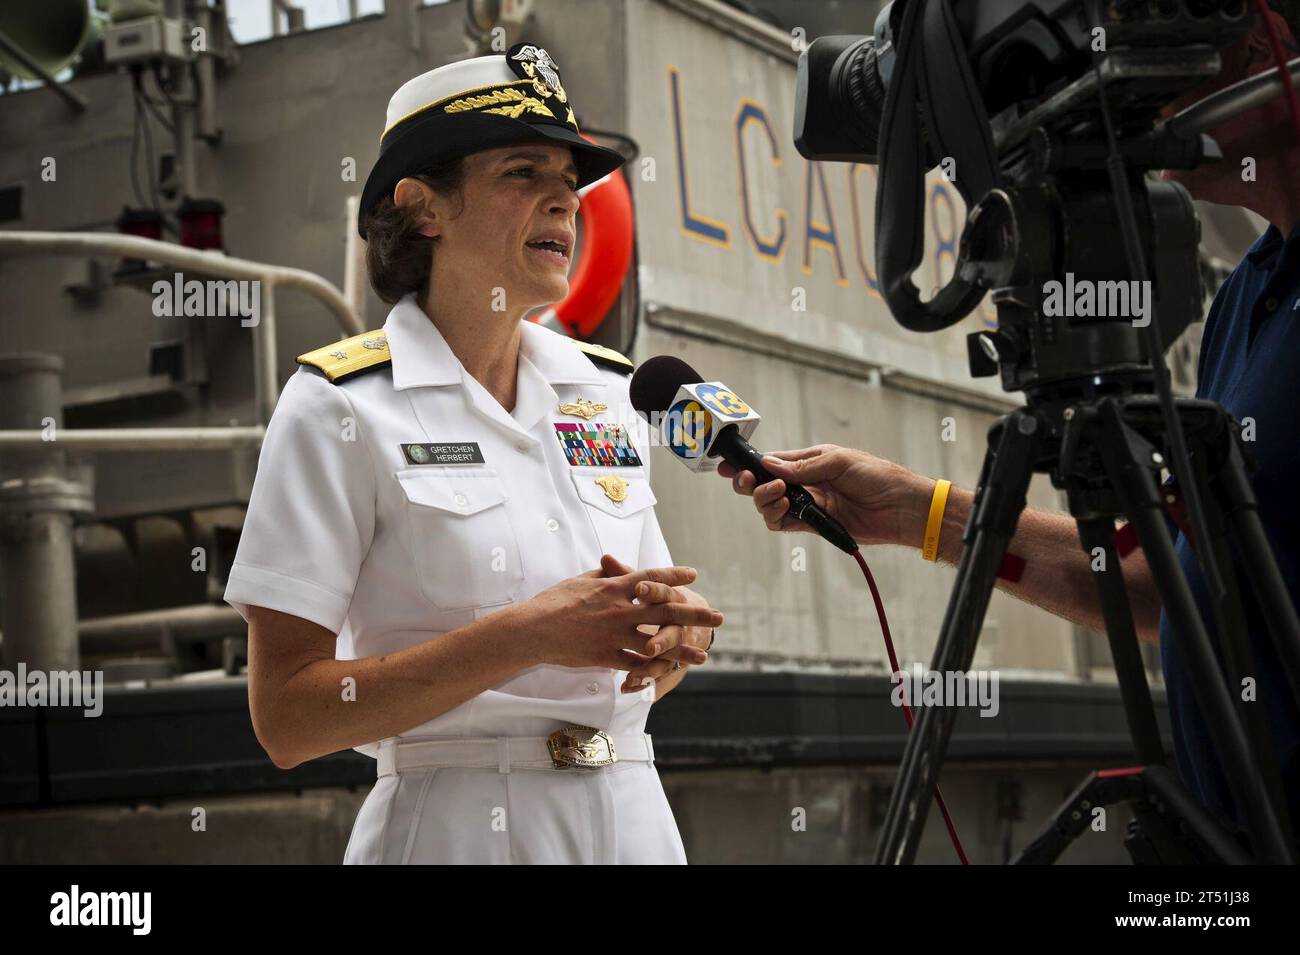 110622KK576-062 VIRGINIA BEACH, Va. (June 22, 2011) Rear Adm. Gretchen S. Herbert gives an interview to a news reporter after the Navy Cyber Forces change of command ceremony at Joint Expeditionary Base Little Creek-Fort Story. Rear Adm. Gretchen S. Herbert relieved Rear Adm. Thomas P. Meek as commander of Navy Cyber Forces, the Navy's global type commander responsible for generating current and future cyber readiness in the Fleet. Navy Stock Photo